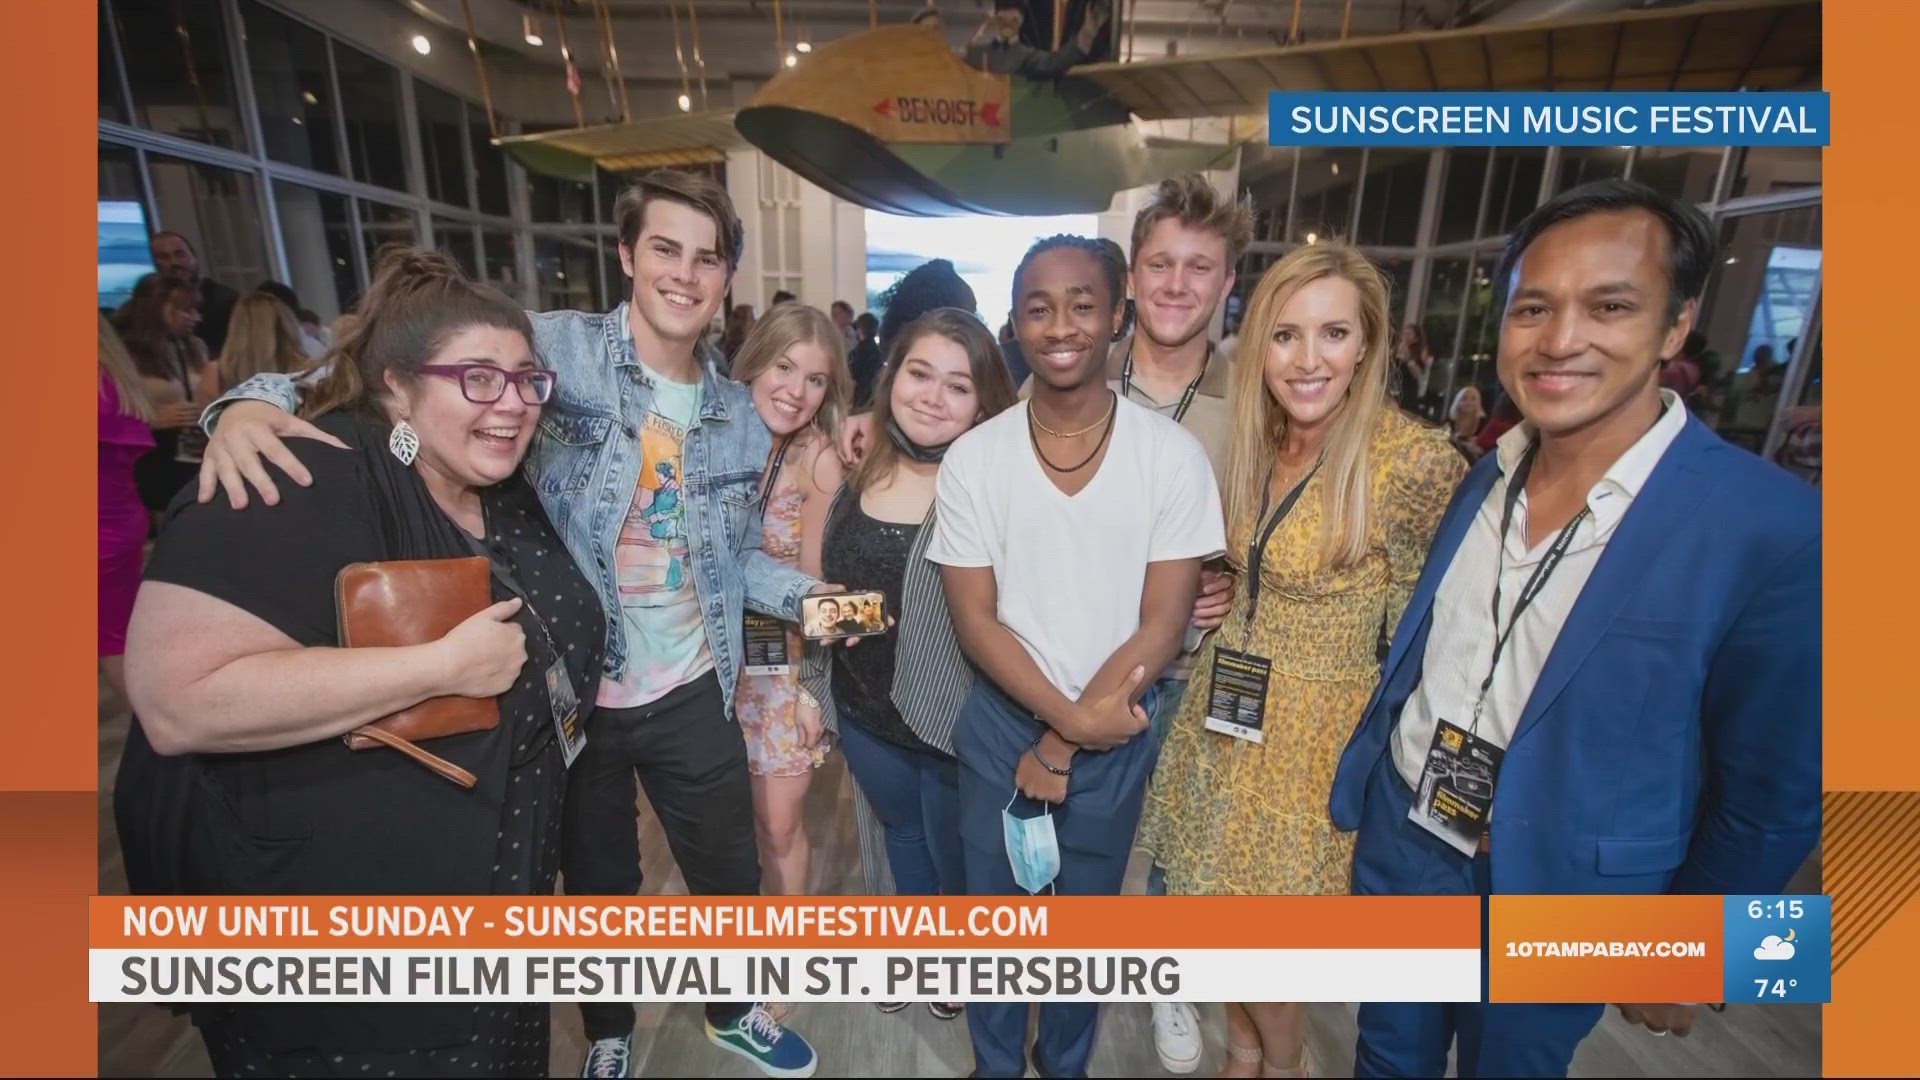 The Sunscreen Film Festival and the Gasparilla Music Festival are happening this weekend.